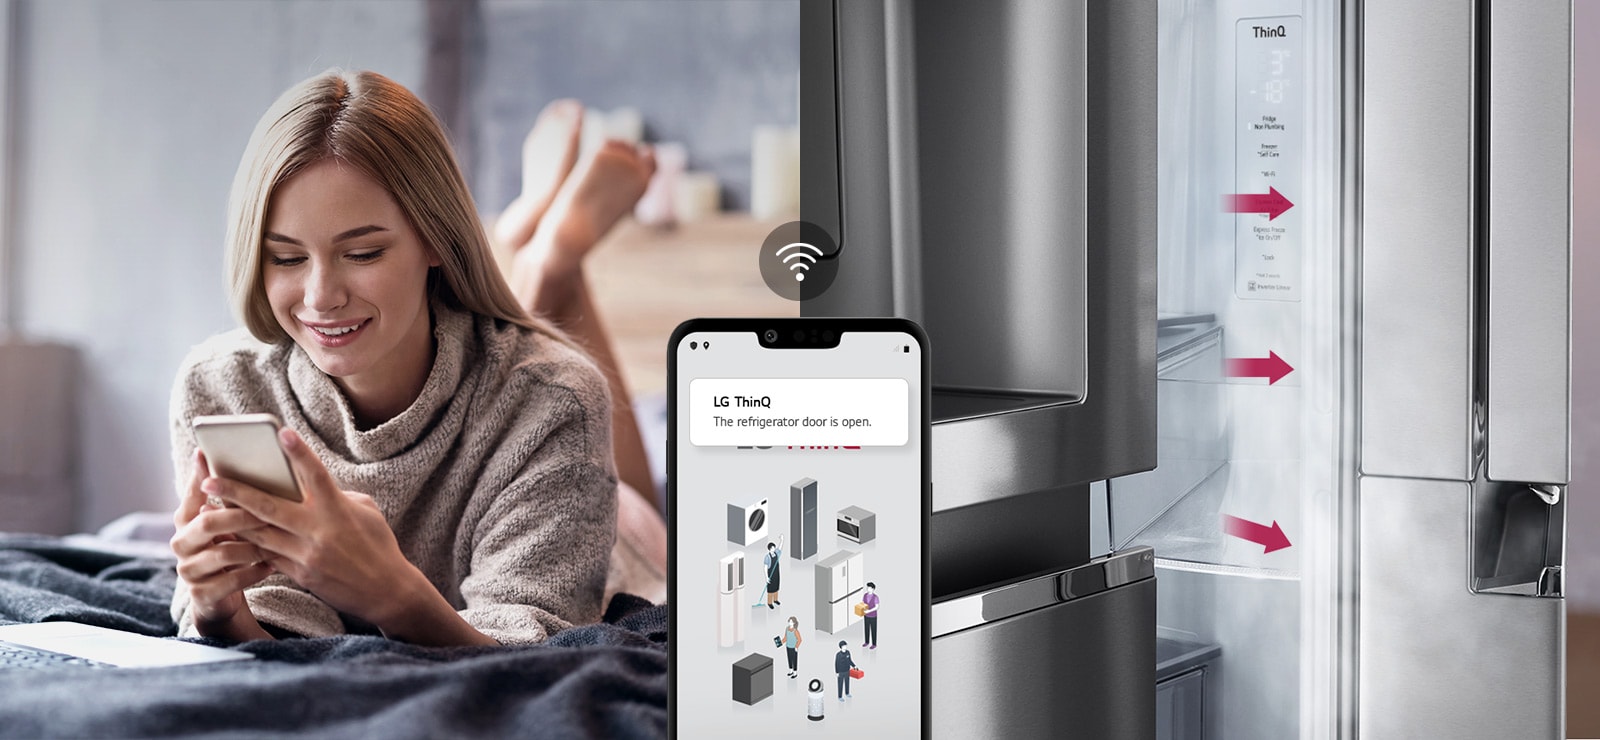 A woman lounges on a bed looking at her phone screen on one image. The second image shows that the refrigerator door has been left open. In the foreground of the two images is the phone screen which shows the LG ThinQ app notifications and the Wifi icon above the phone.